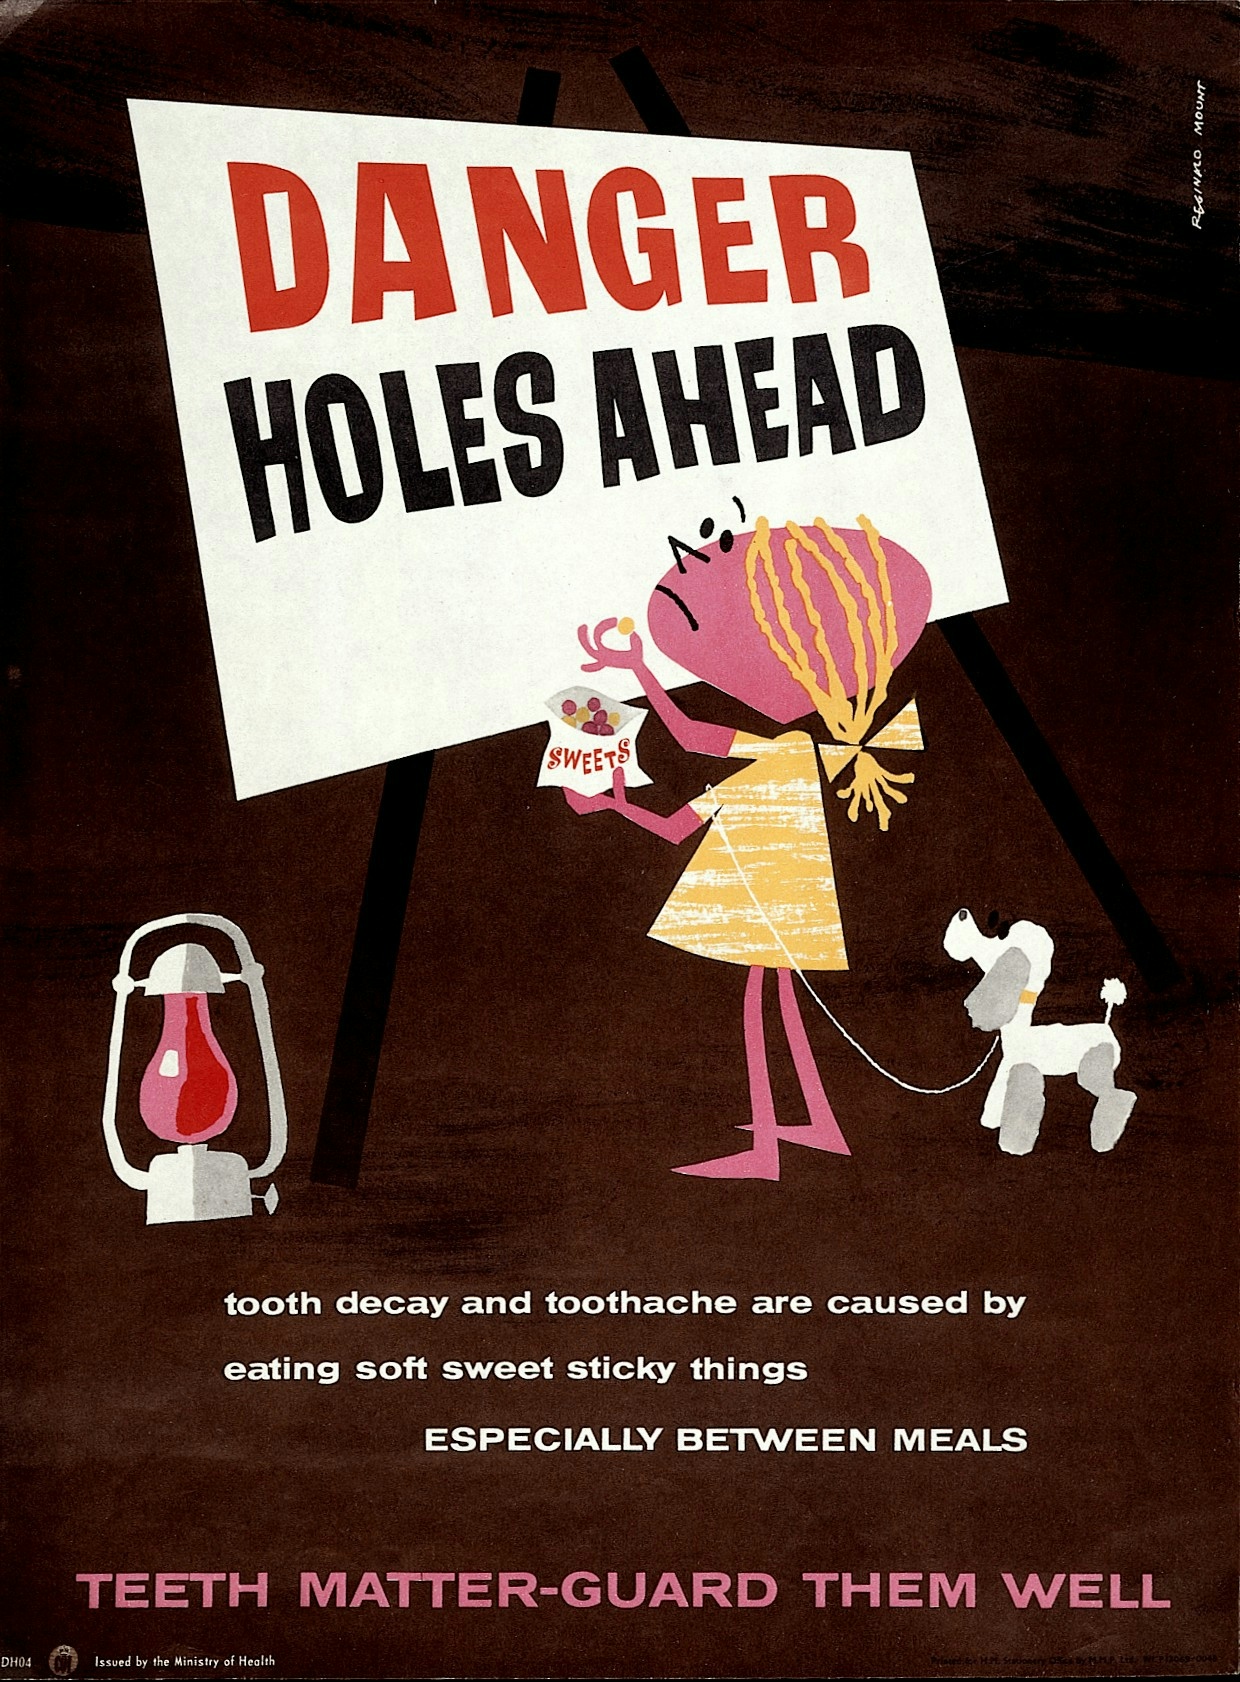 A poster with a cartoon figure of a girl holding a bag of sweets looking in dismay at a sign that reads "Danger: Holes ahead". Poster warns that "tooth decay and toothache are caused by eating soft sweet sticky things".